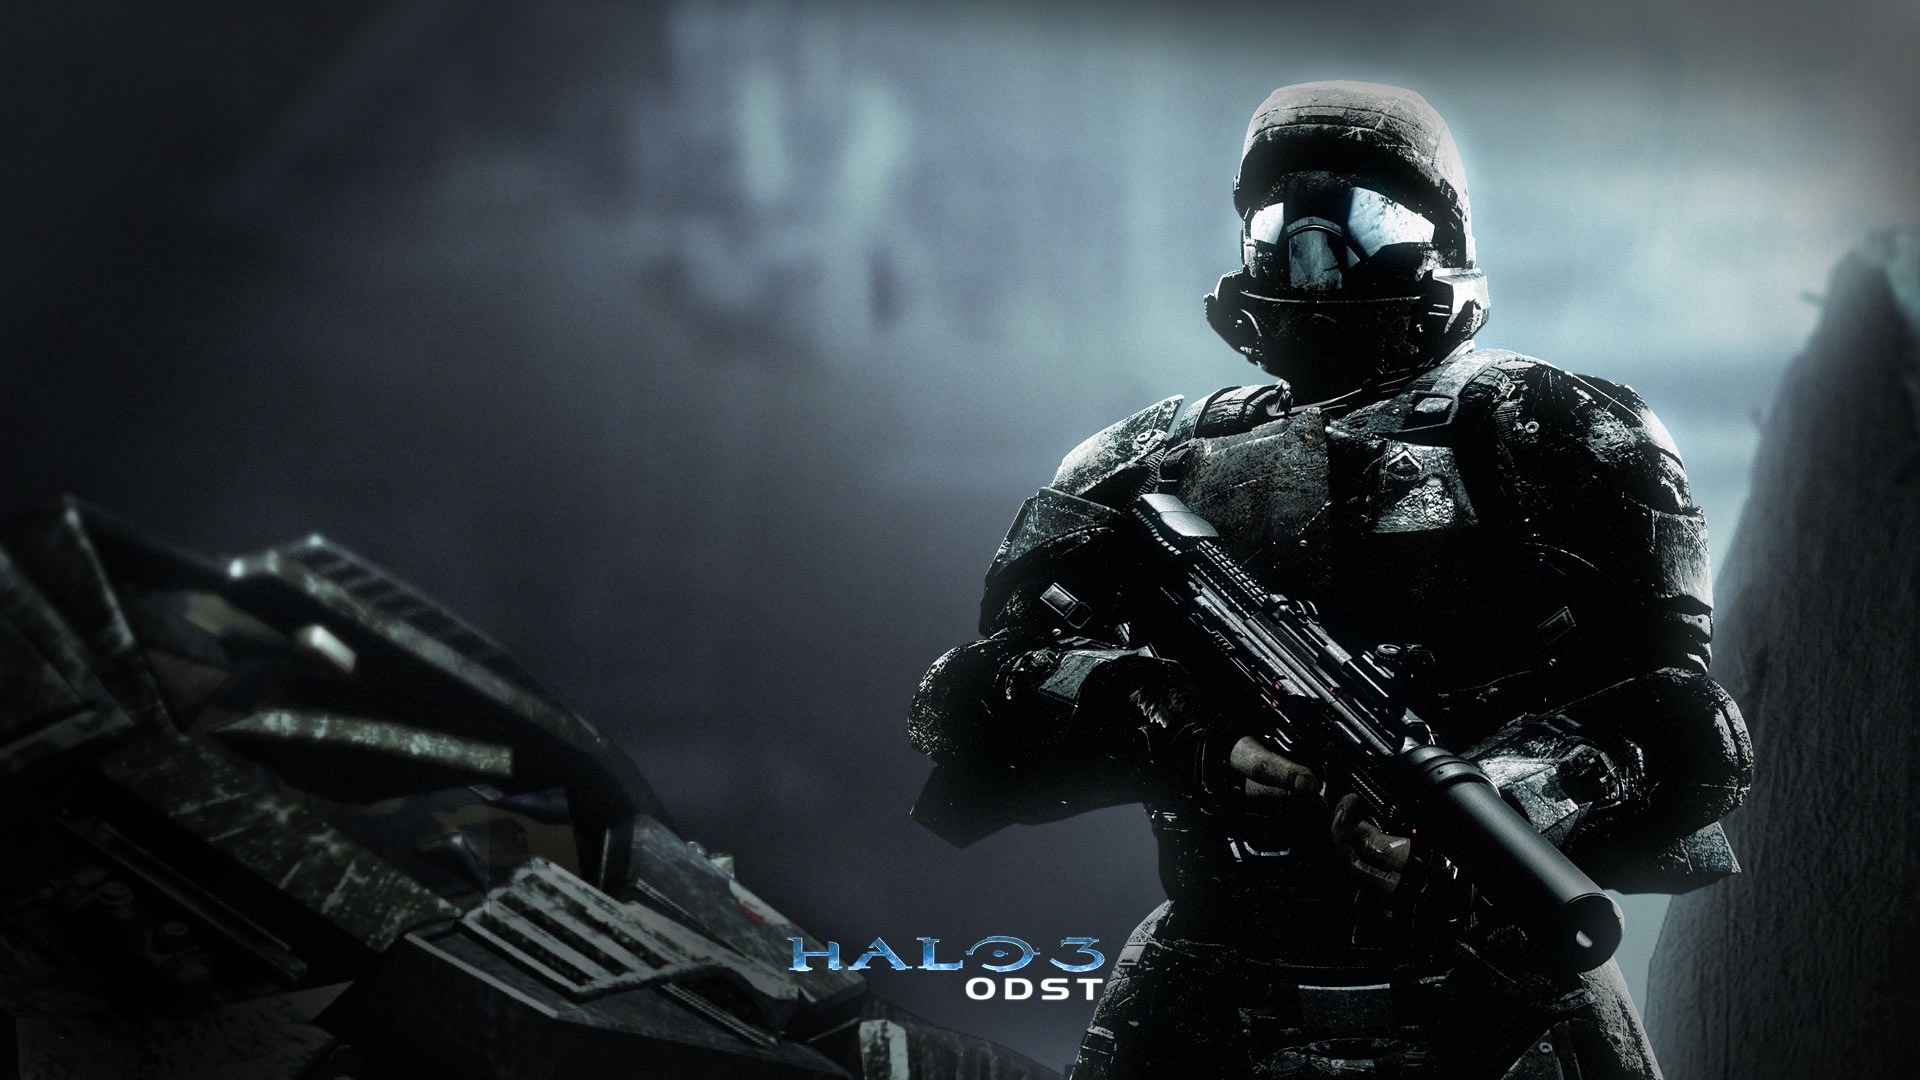 Halo 3 ODST at 1920 x 1080 size.